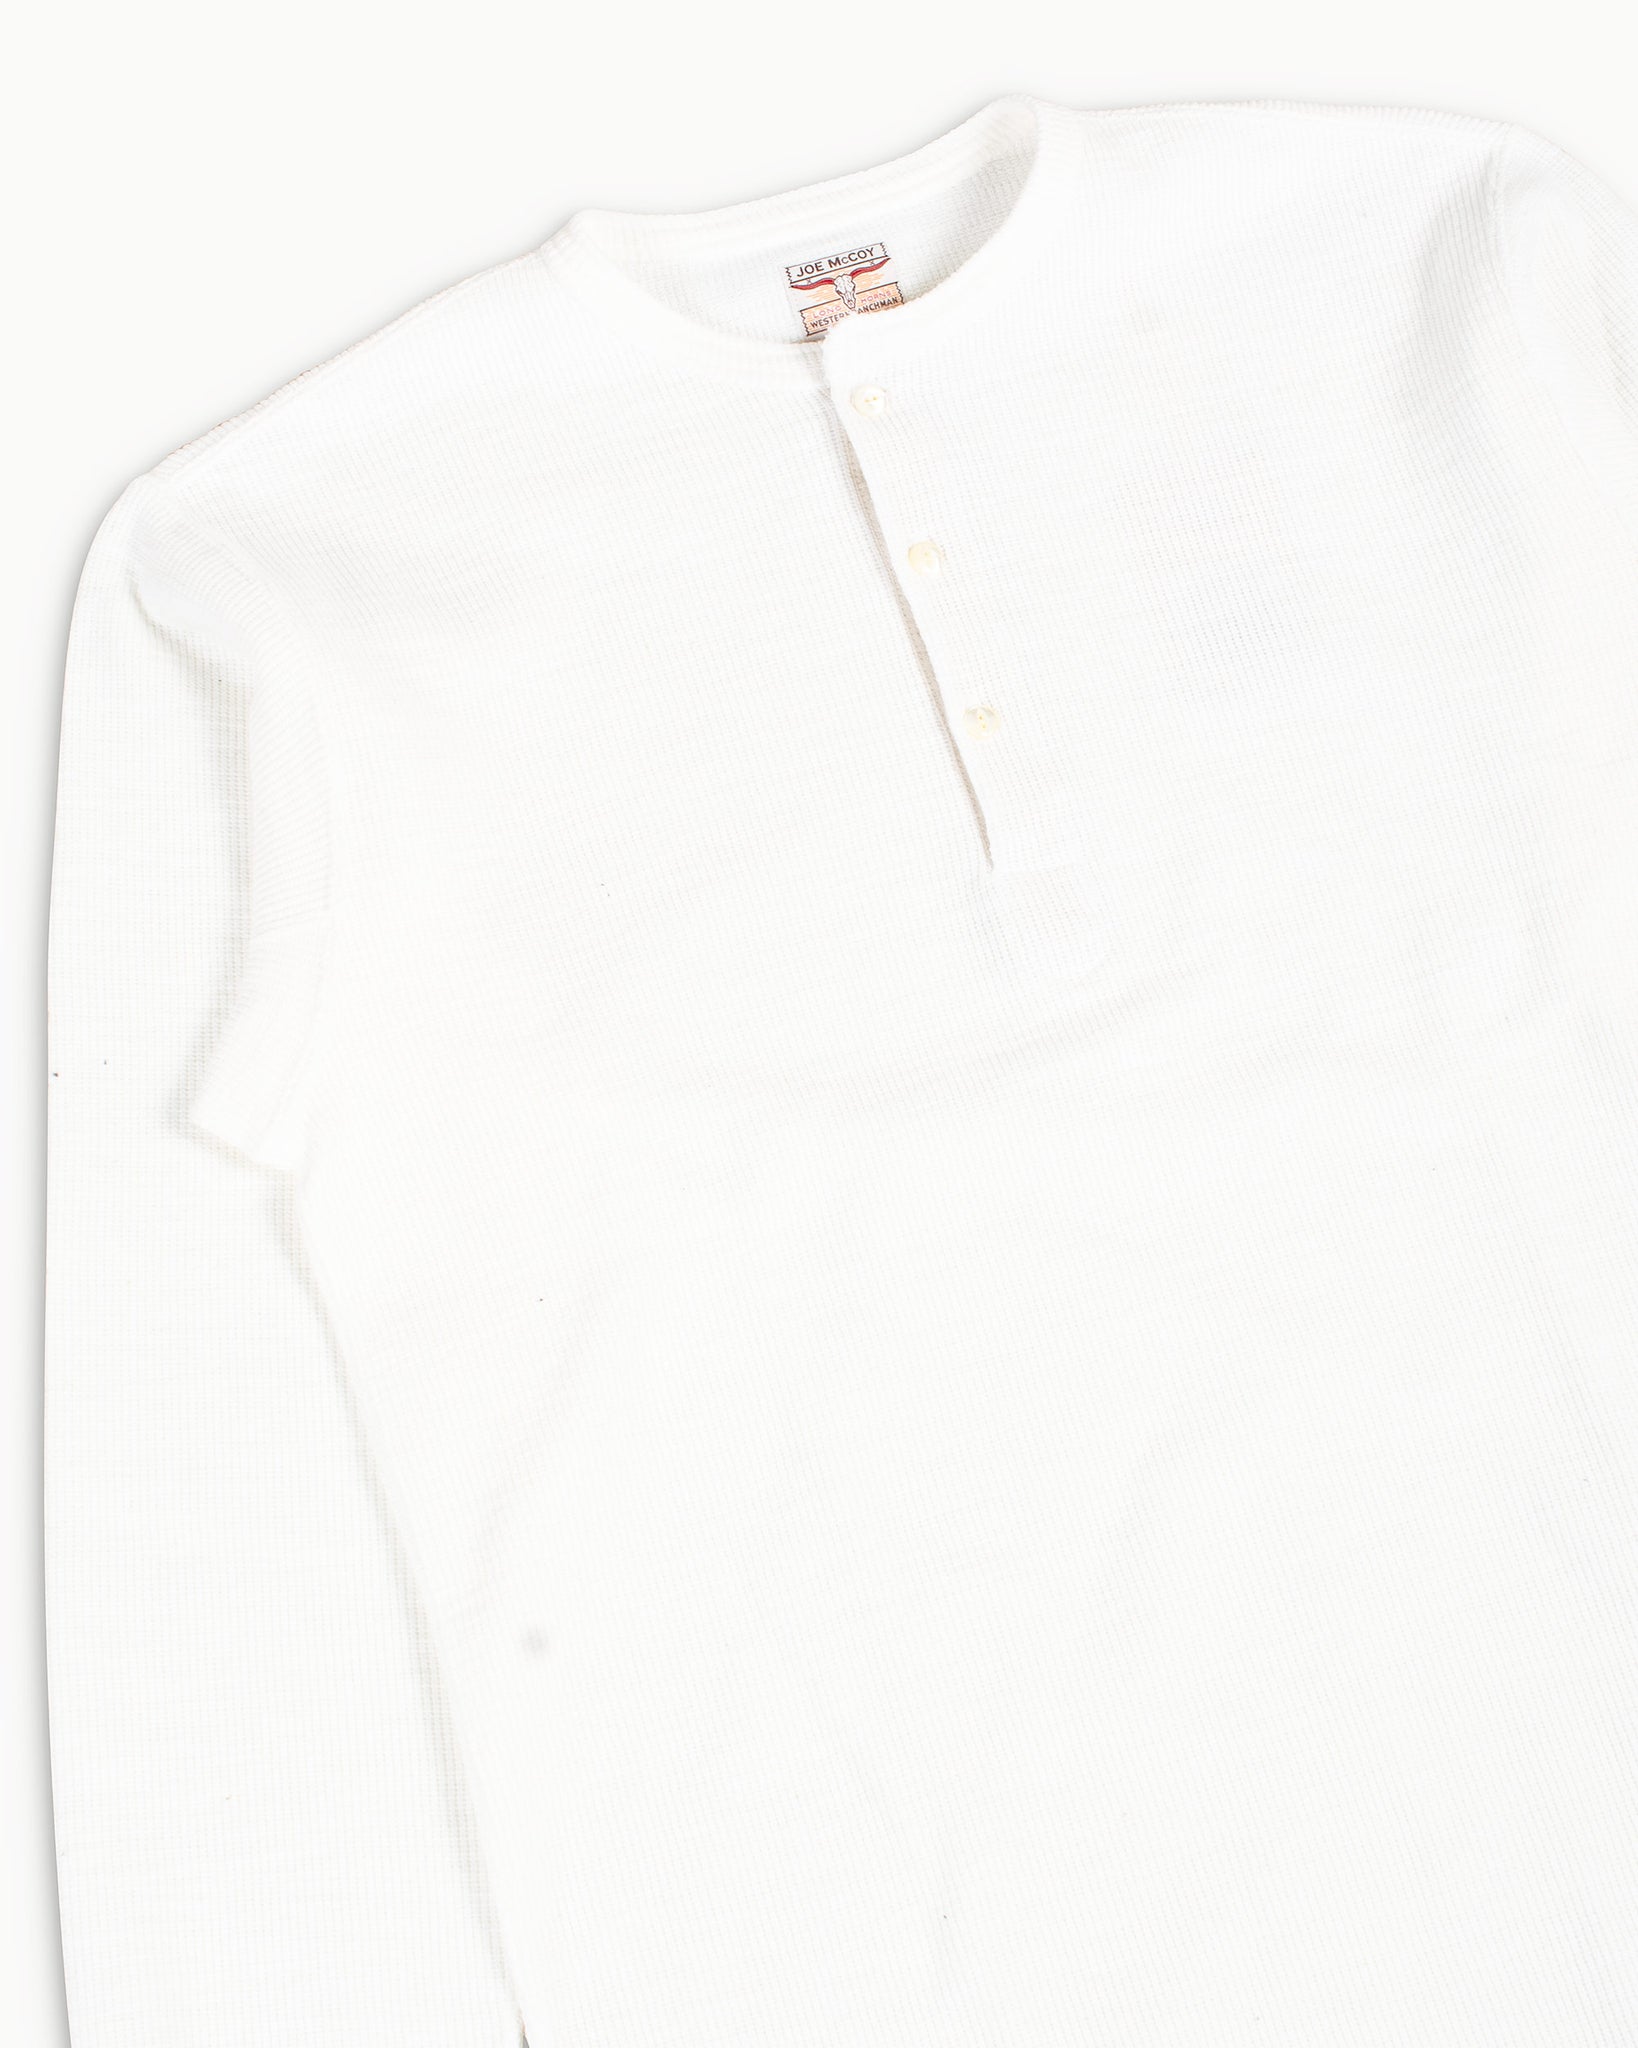 The Real McCoy's MC22120 Western Cardigan Stitch Henley Shirt White Details